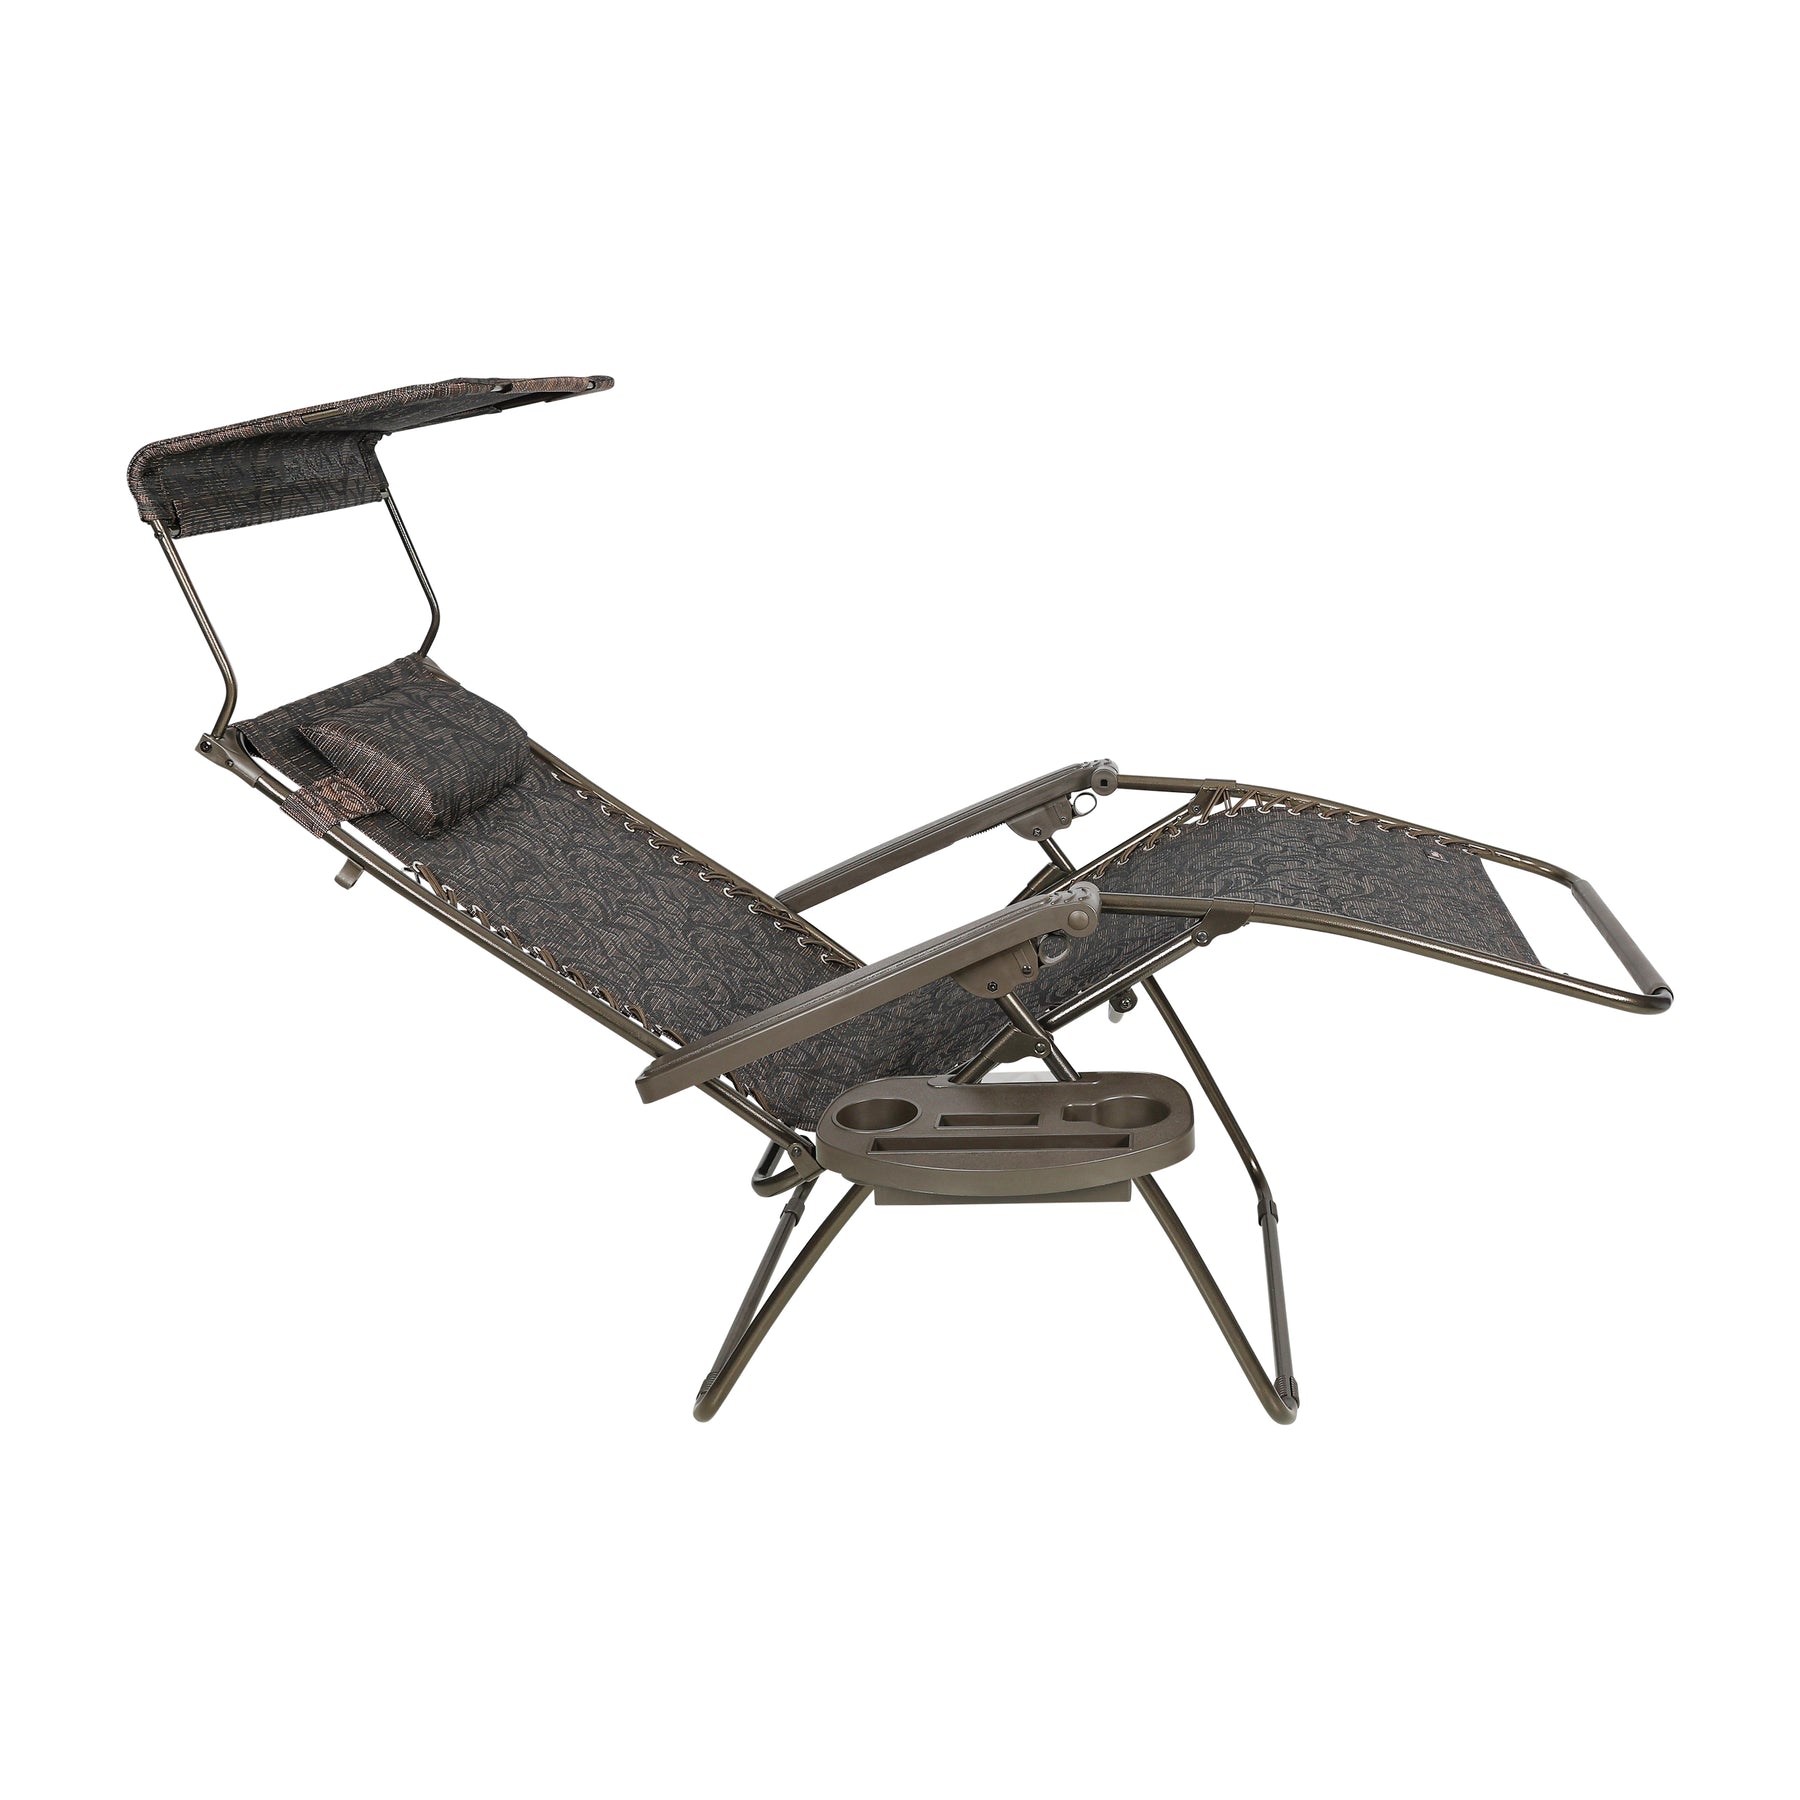 Side view of a reclined Bliss Hammocks 26-inch Wide Zero Gravity Chair with Canopy, Pillow, and Drink Tray in the brown jacquard variation.